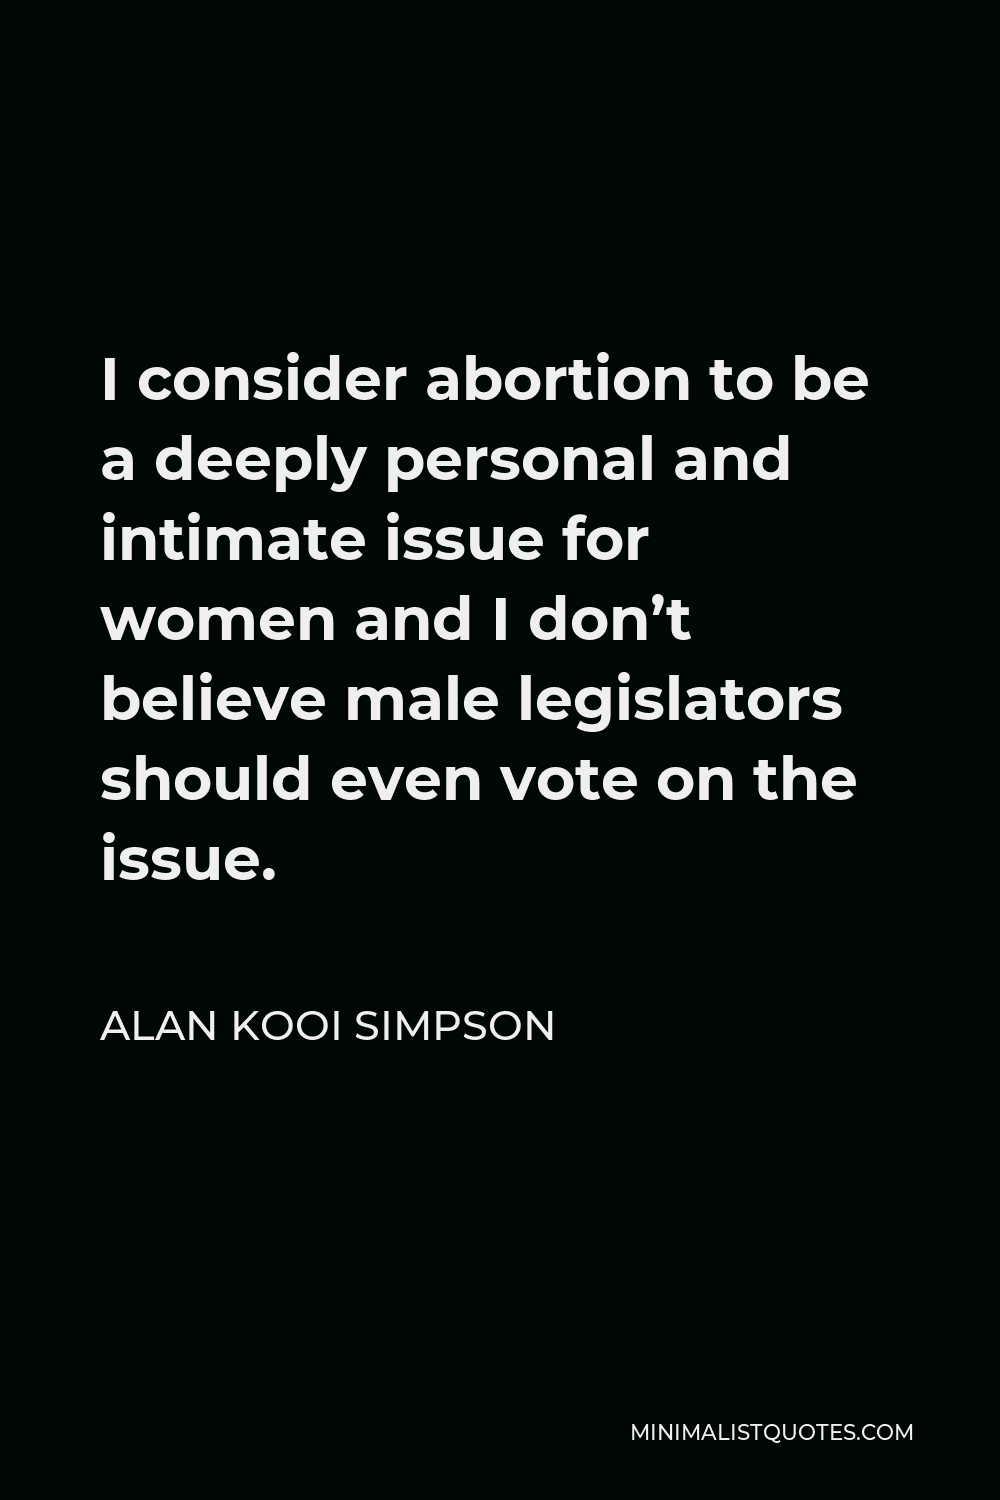 Alan Kooi Simpson Quote - I consider abortion to be a deeply personal and intimate issue for women and I don’t believe male legislators should even vote on the issue.